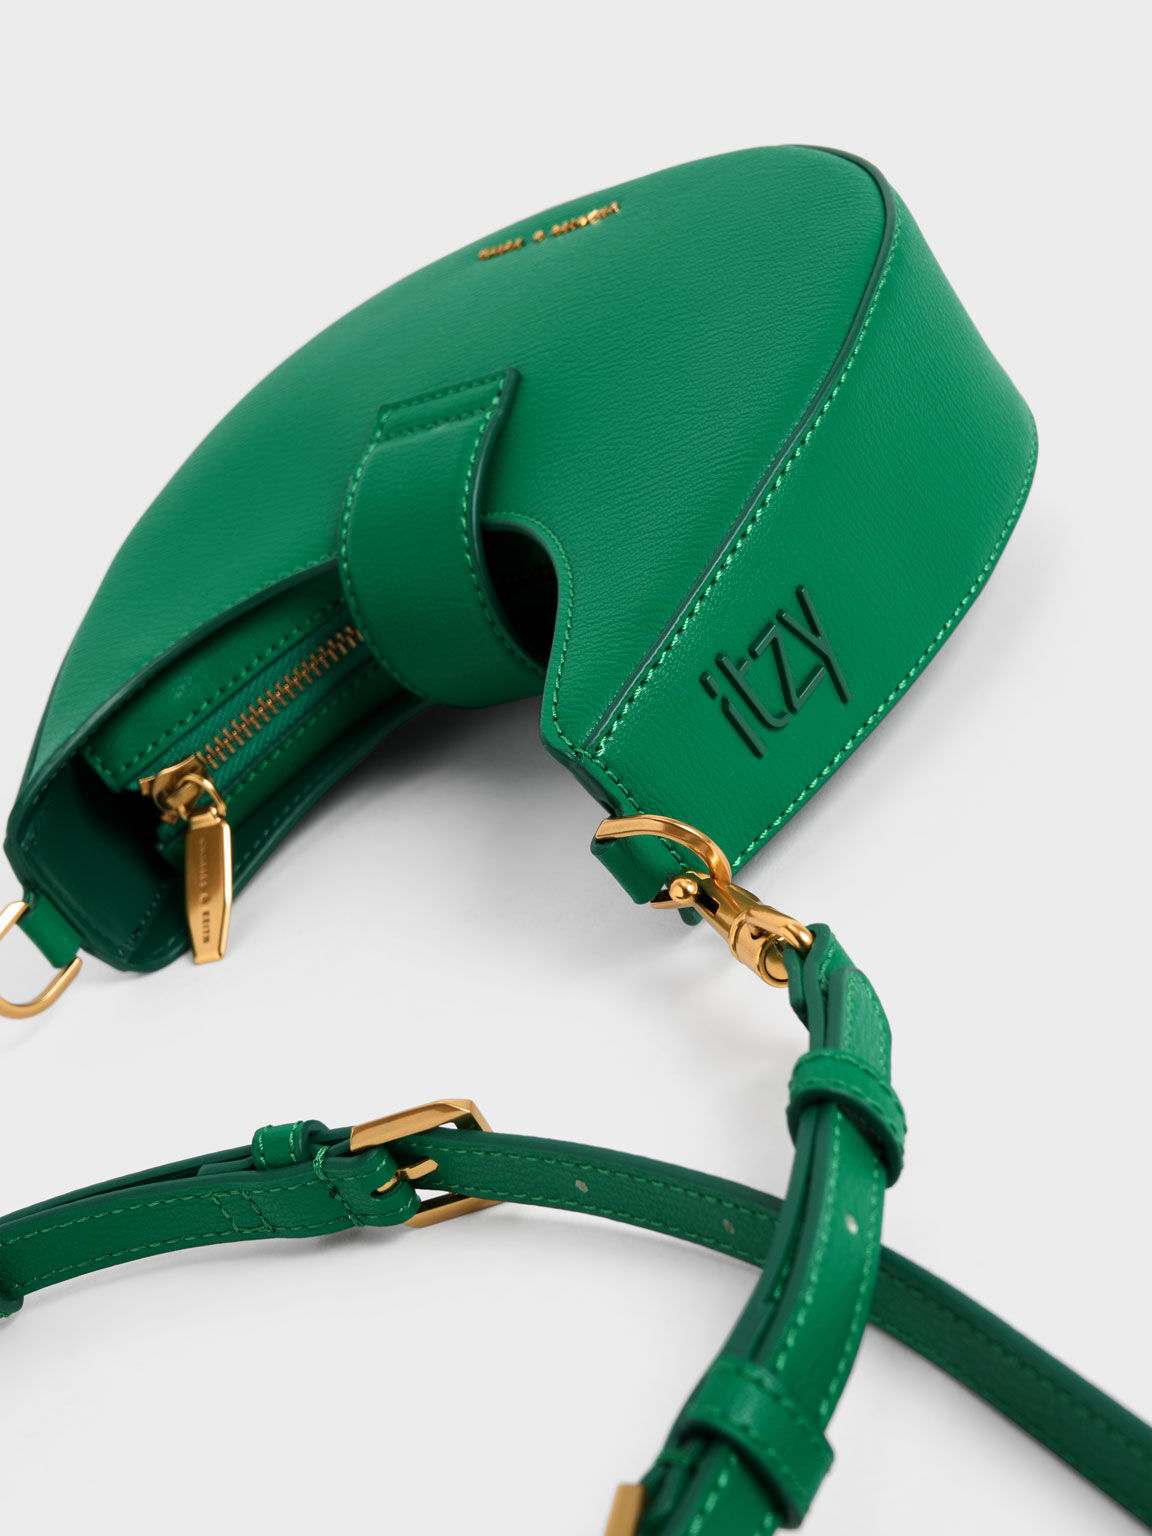 Women's Shoulder Bags | Exclusive Styles | CHARLES & KEITH UK